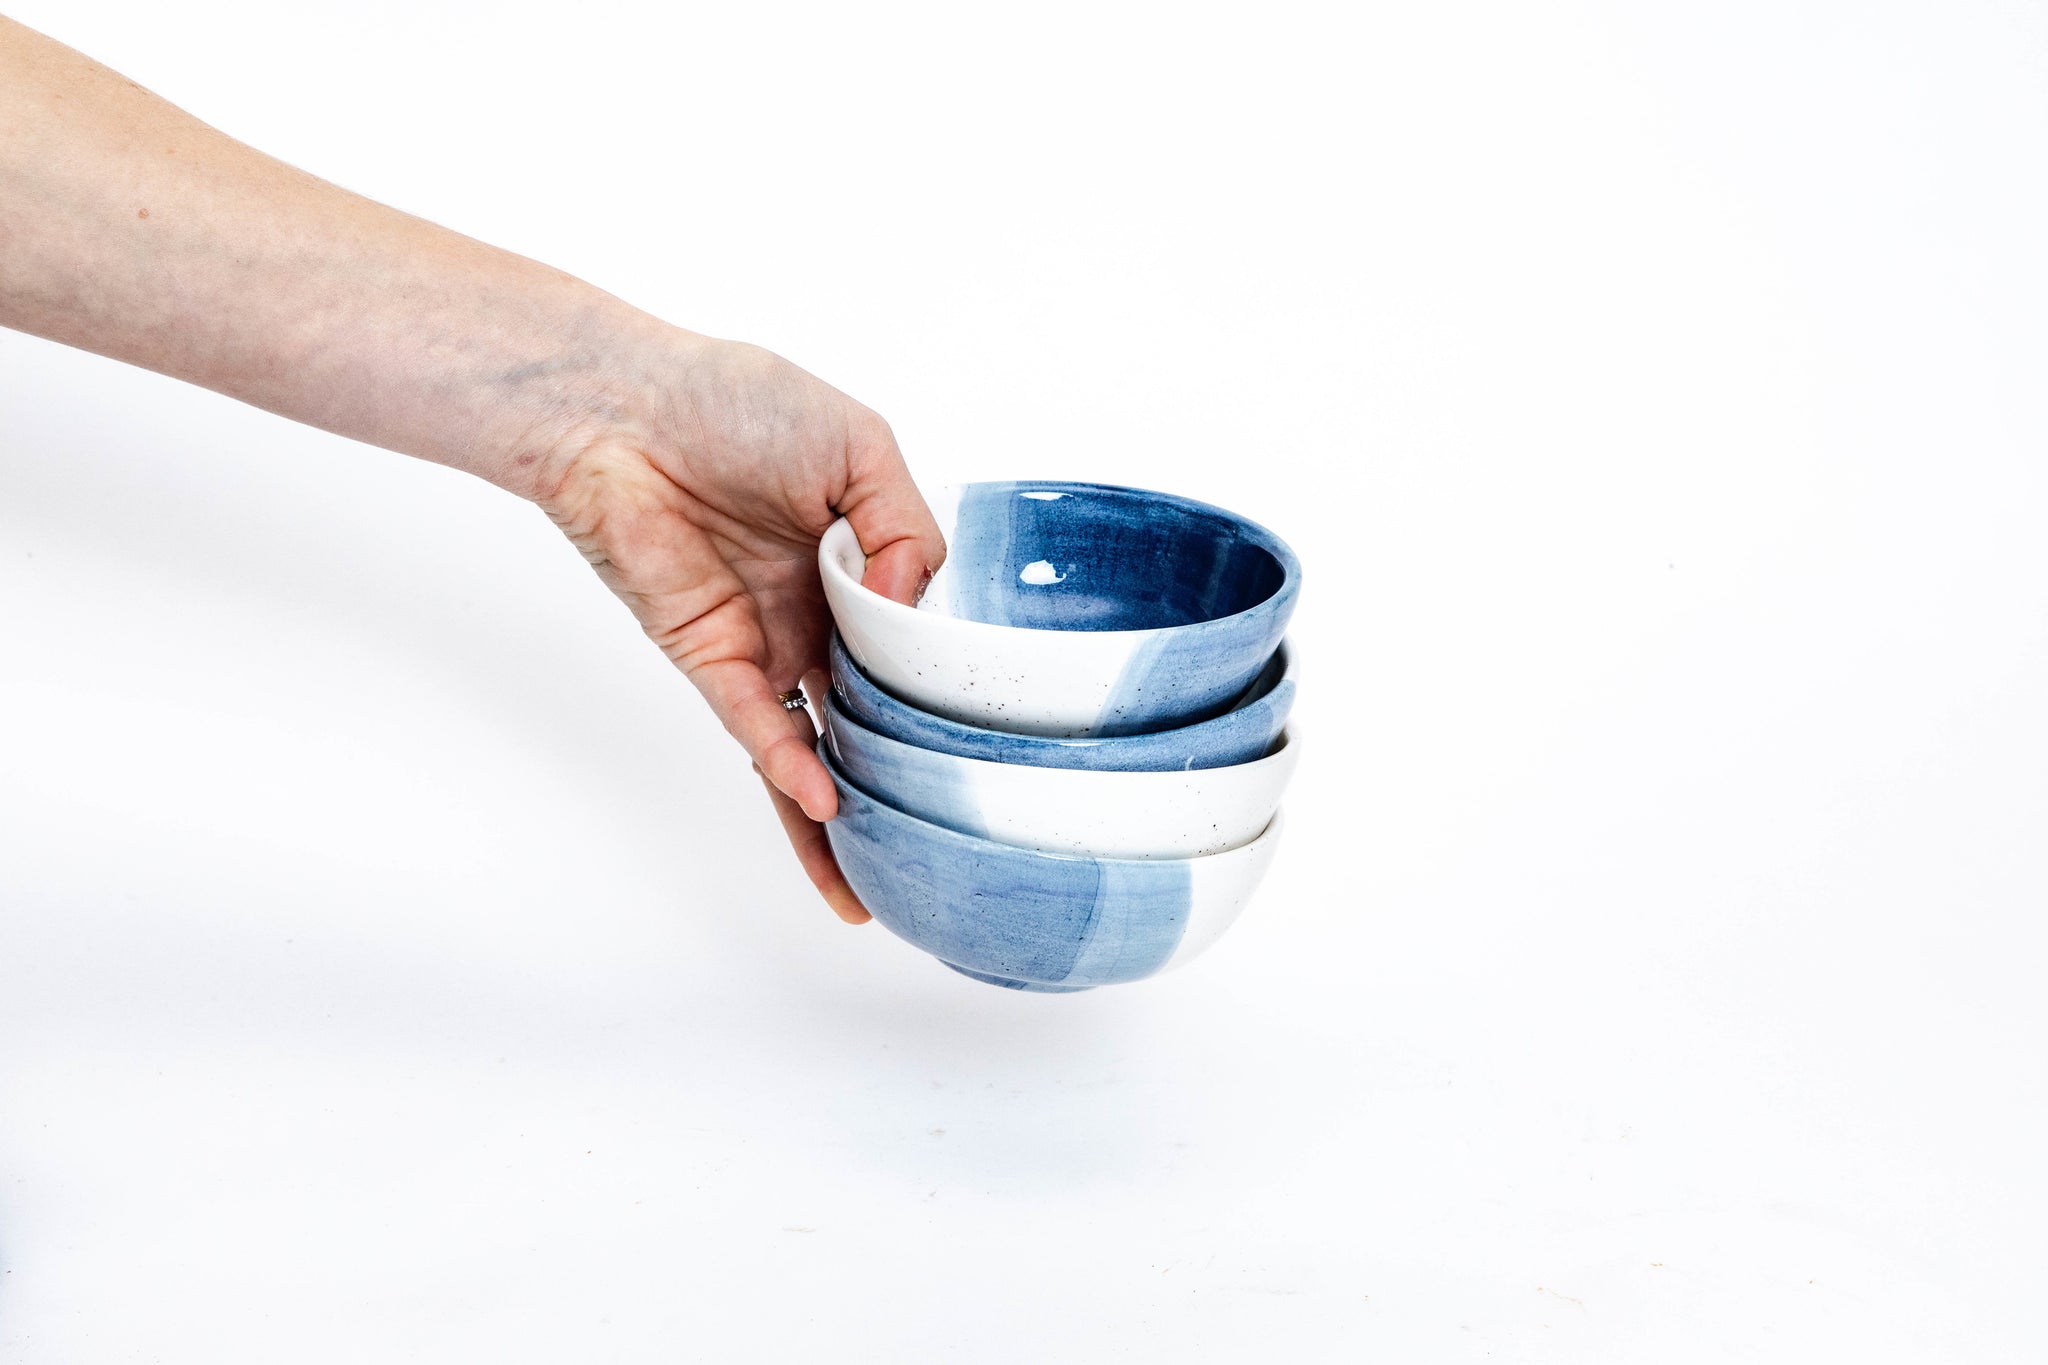 bowl - ceramic blue, handmade in Colombia with hand painted details